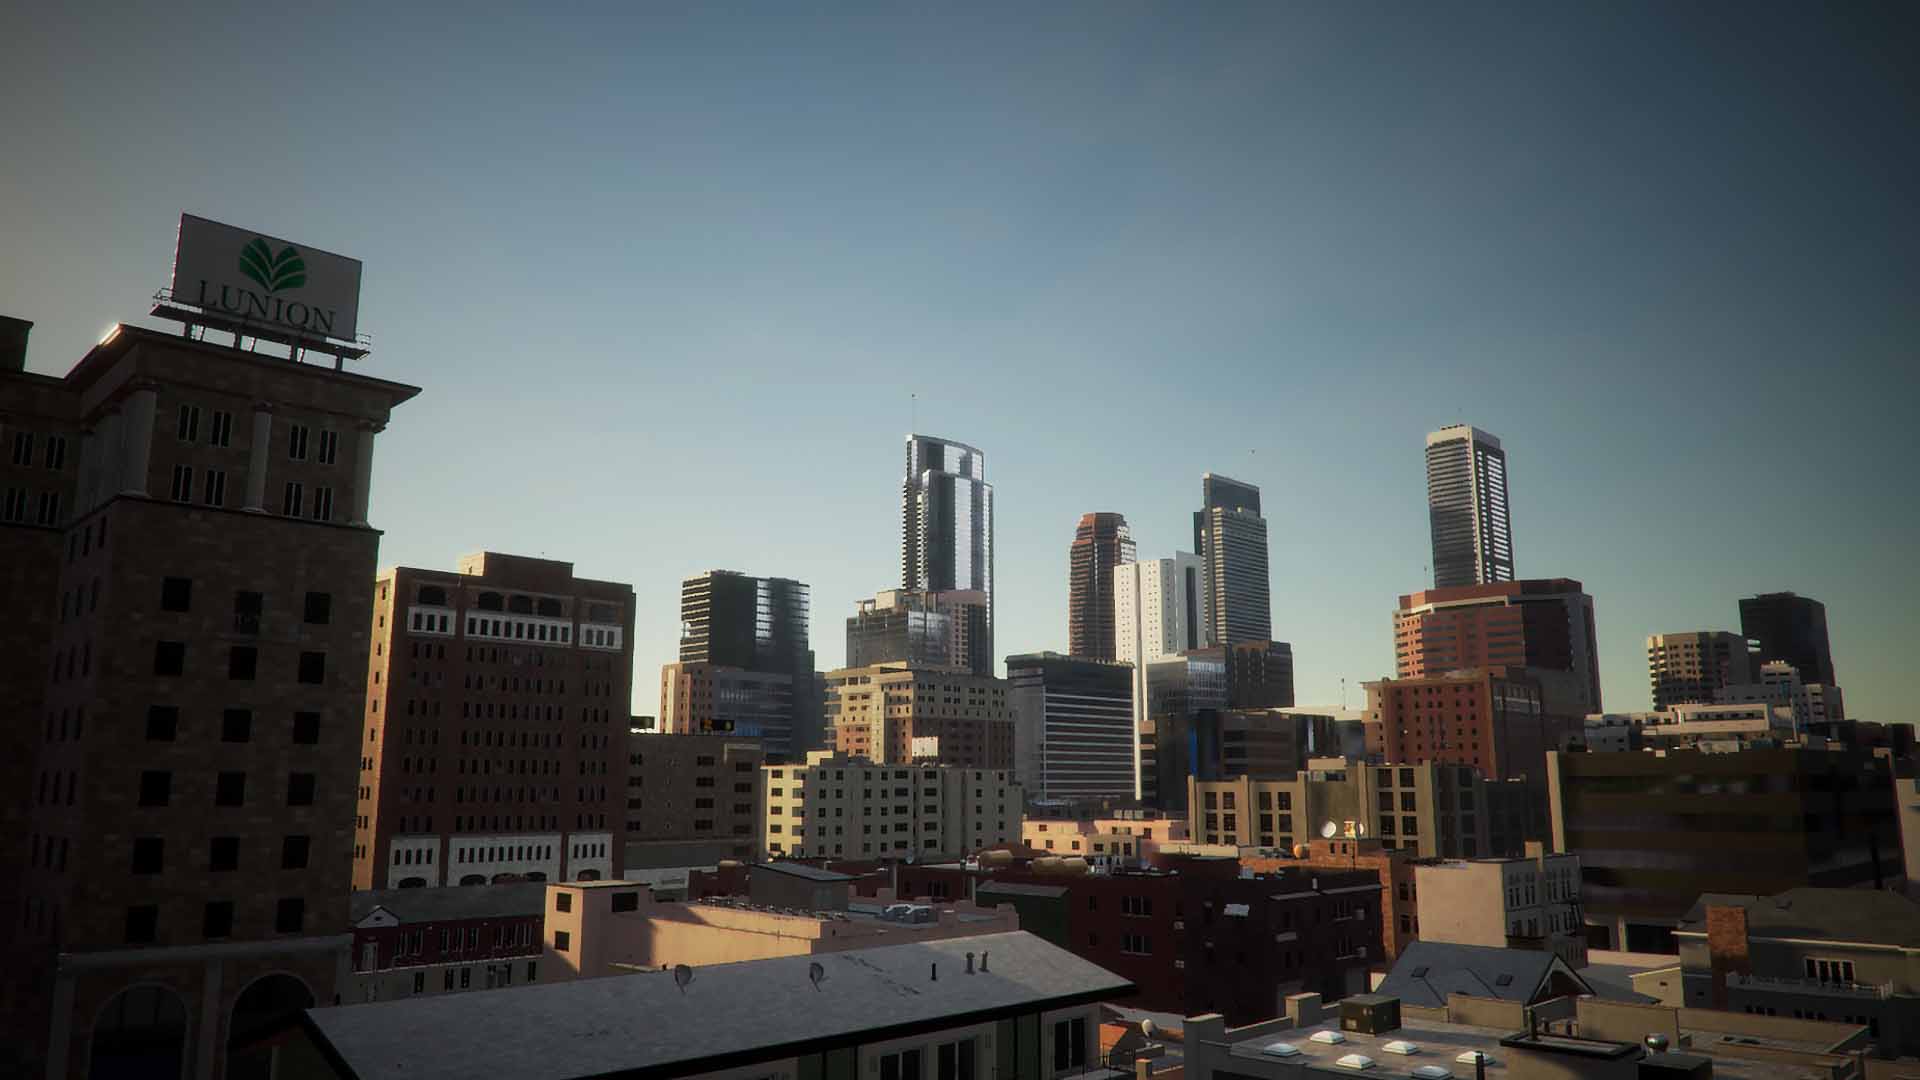 3D city rendered using Houdini/Redshift3D